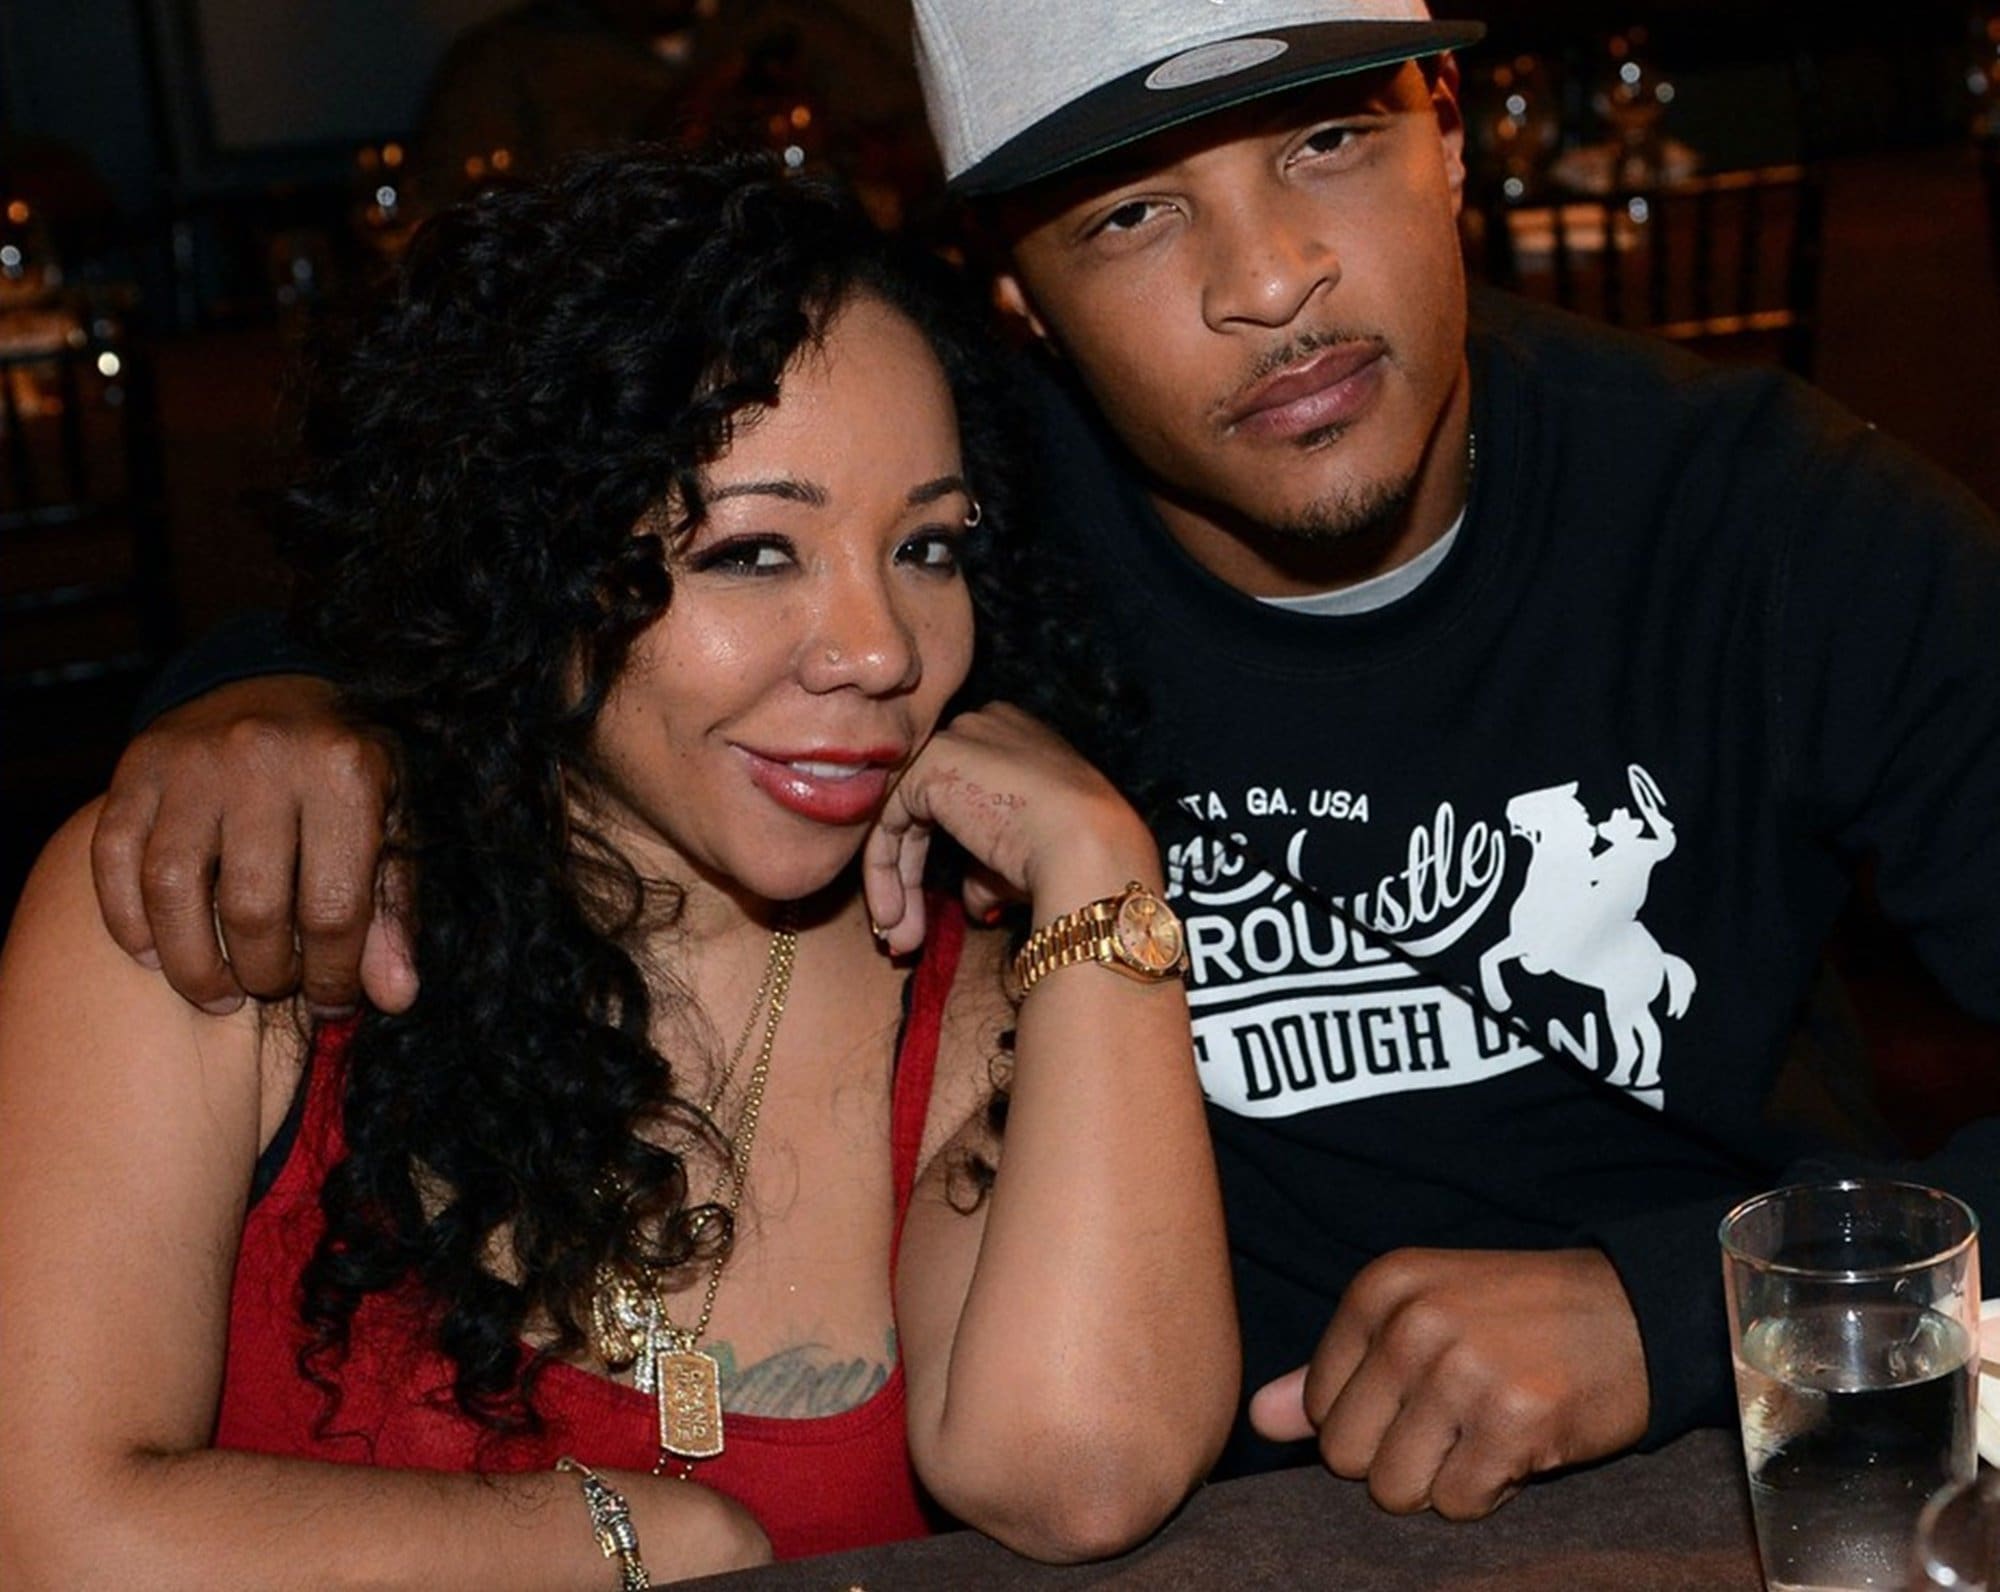 T.I. And Tiny Harris Spotted Together With Cardi B And Offset At ASCAP Rhythm & Soul Awards - Tiny Defends Cardi From Haters